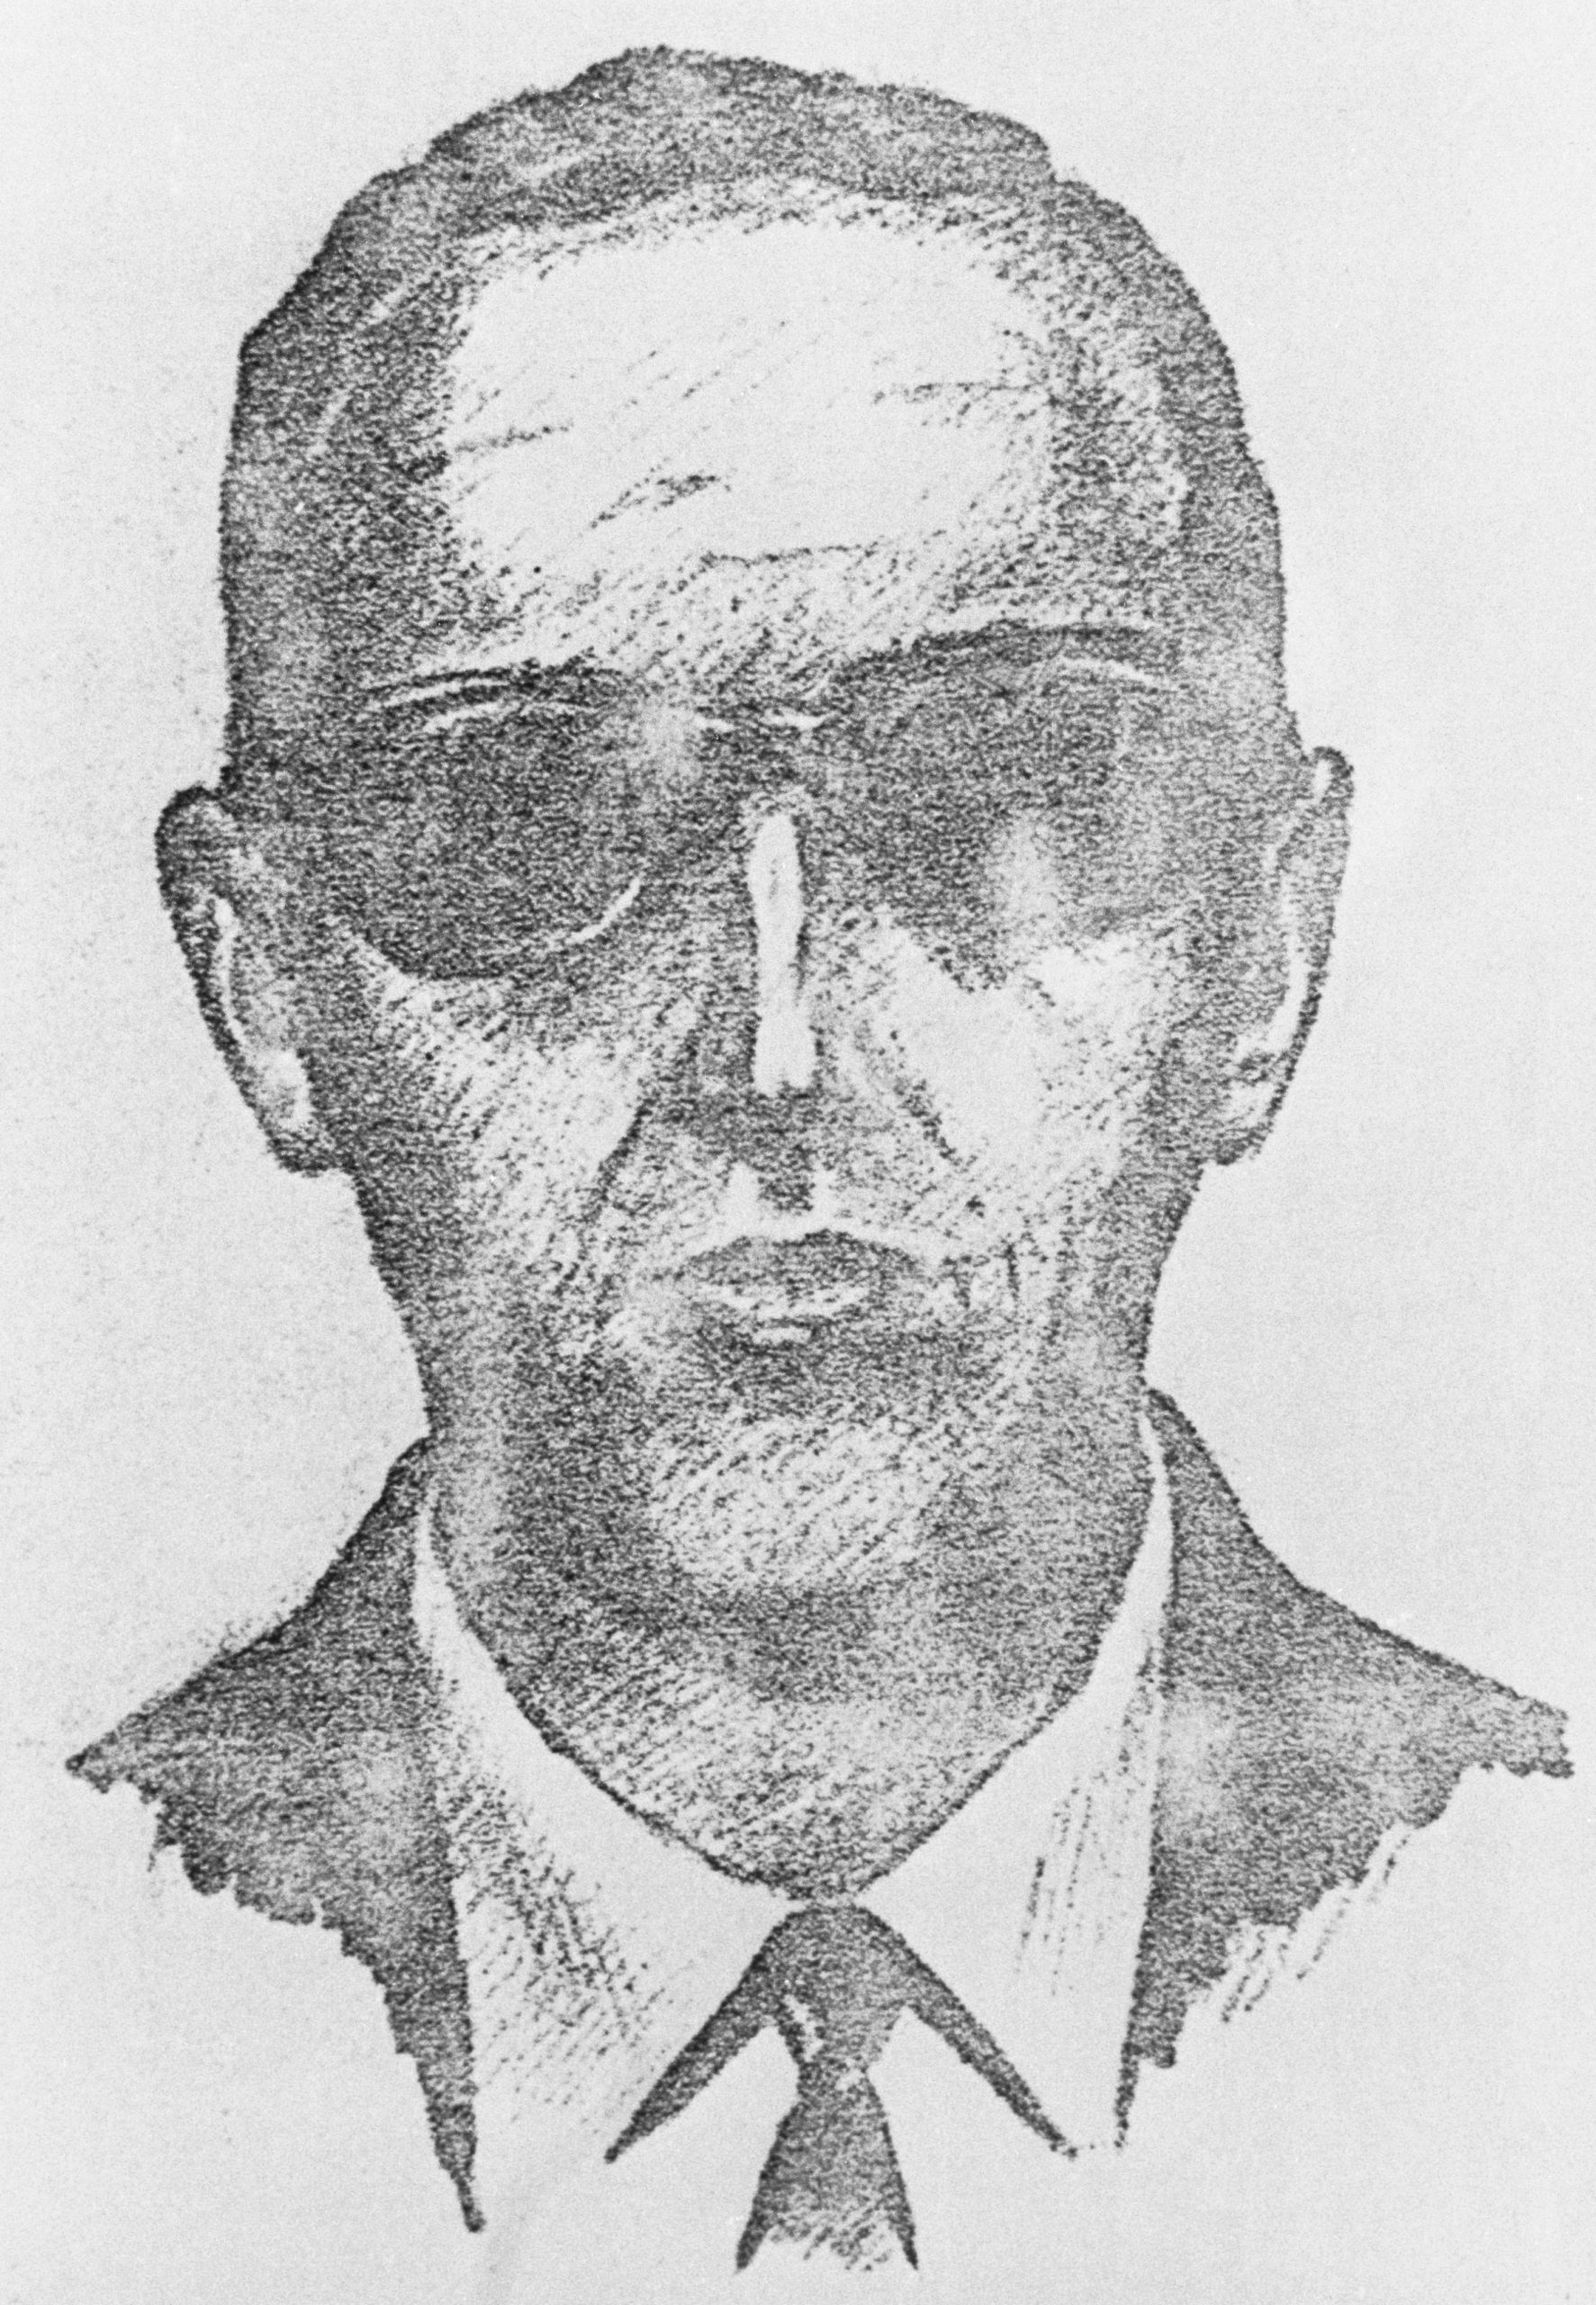 Why We’re Still Obsessed With D.B. Cooper, 51 Years After His Hijacking